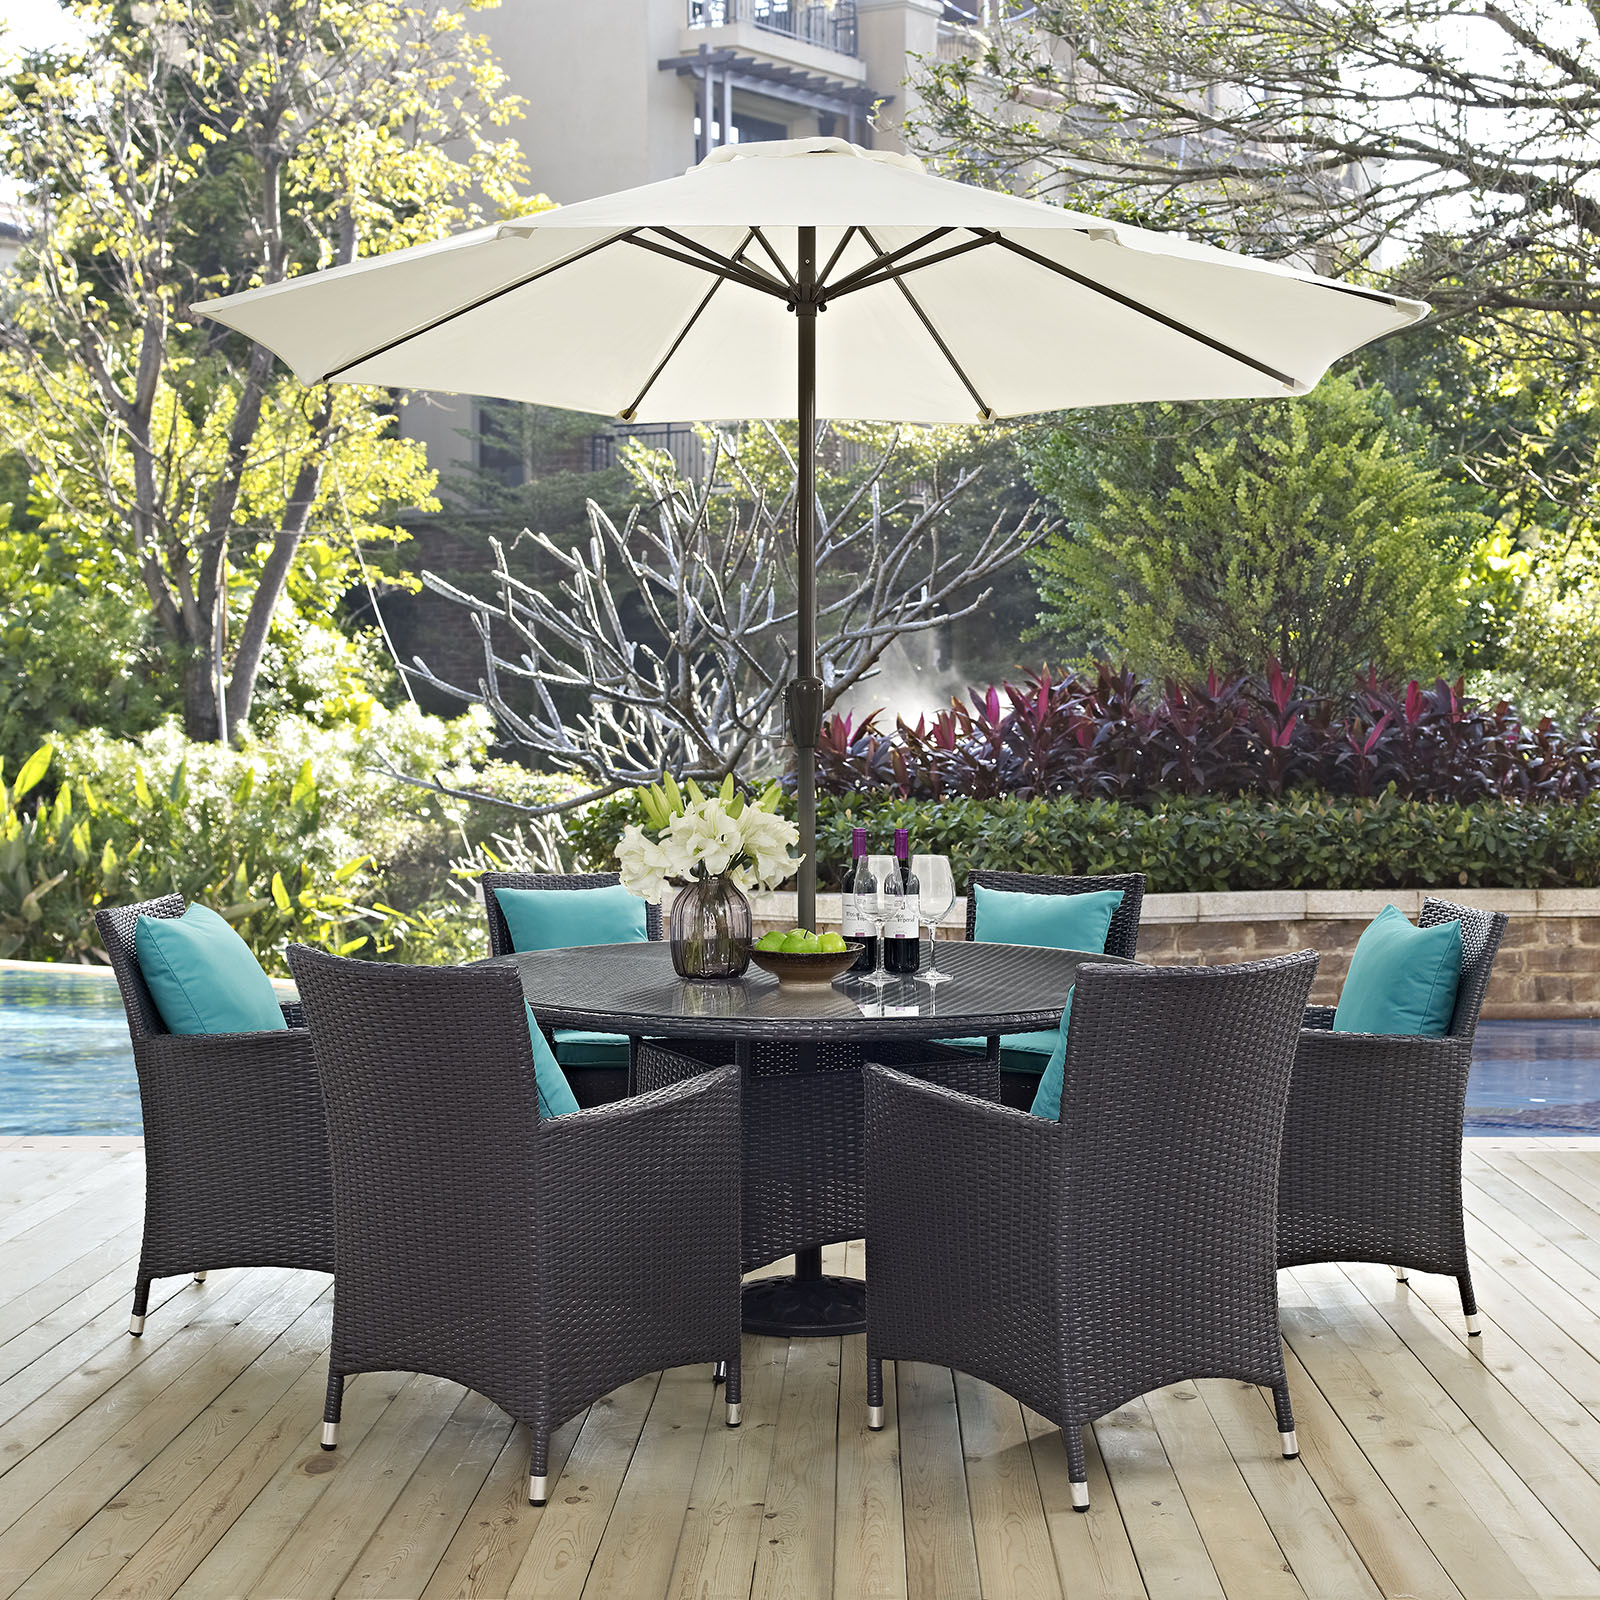 Modway Convene 8 Piece Outdoor Patio Dining Set in Espresso Turquoise - image 1 of 6